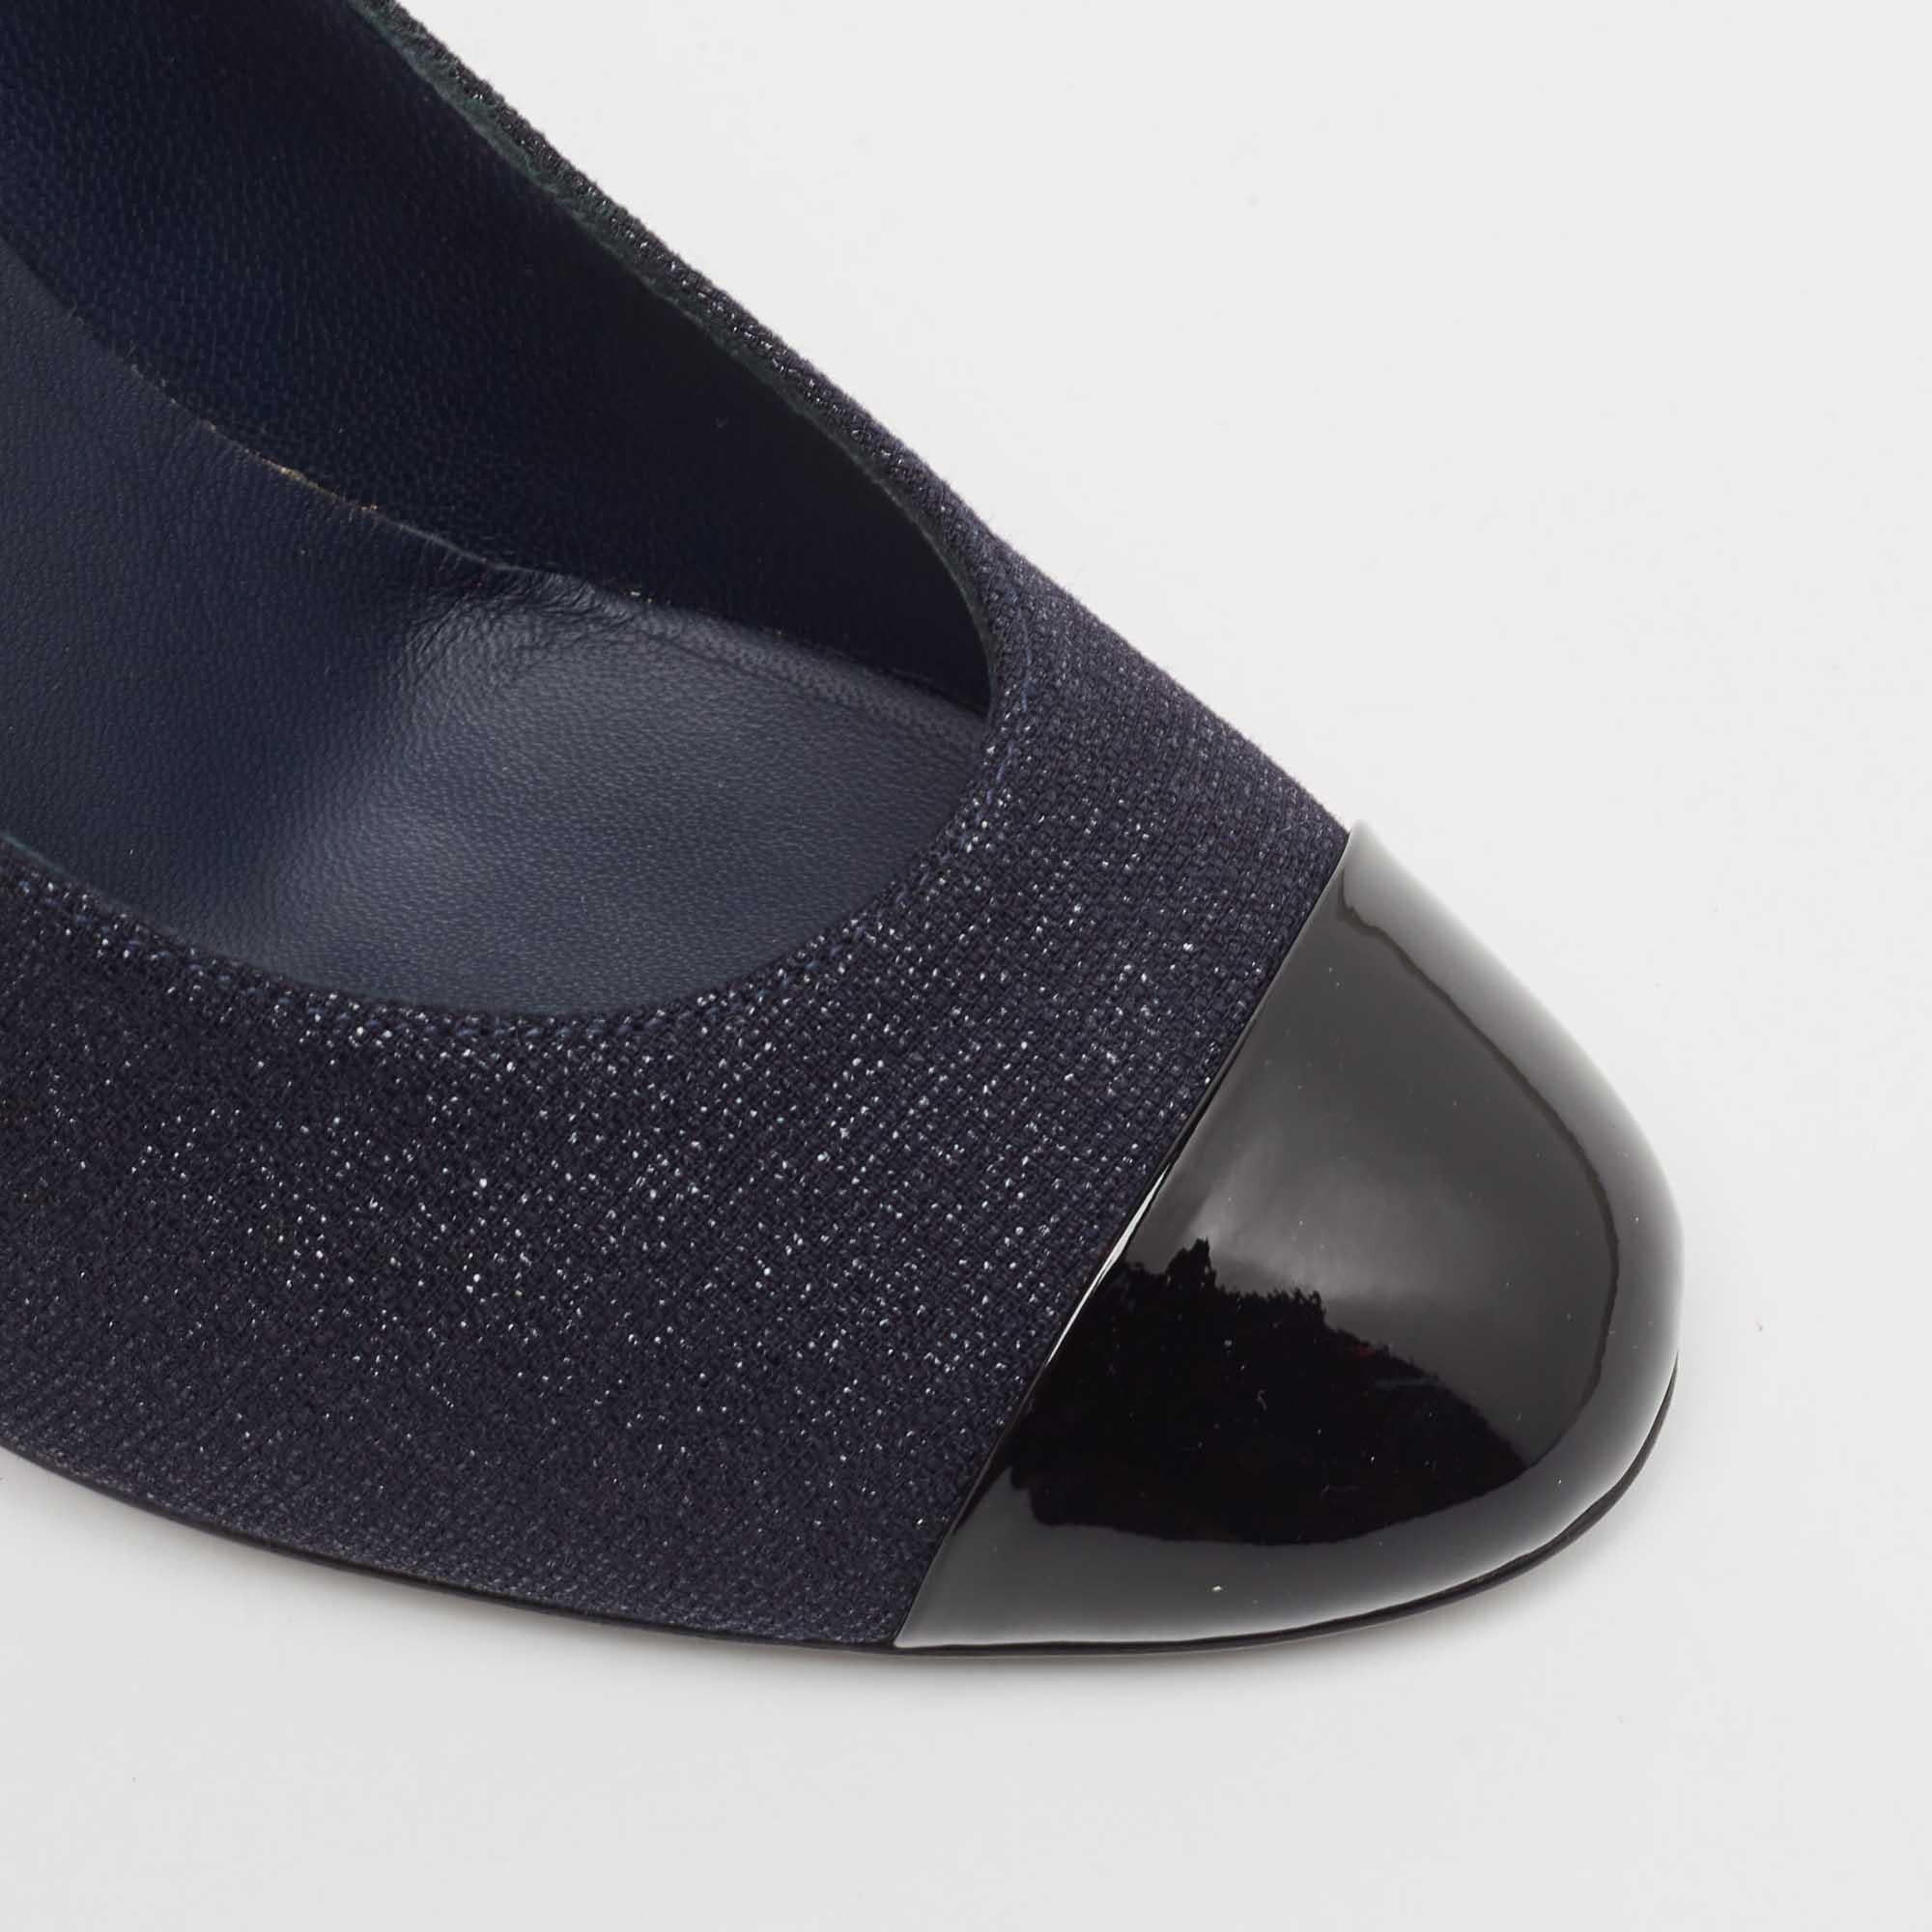 Chanel Navy Blue/Black Lurex Fabric and Patent Leather Cap Toe Pumps Size 39 3